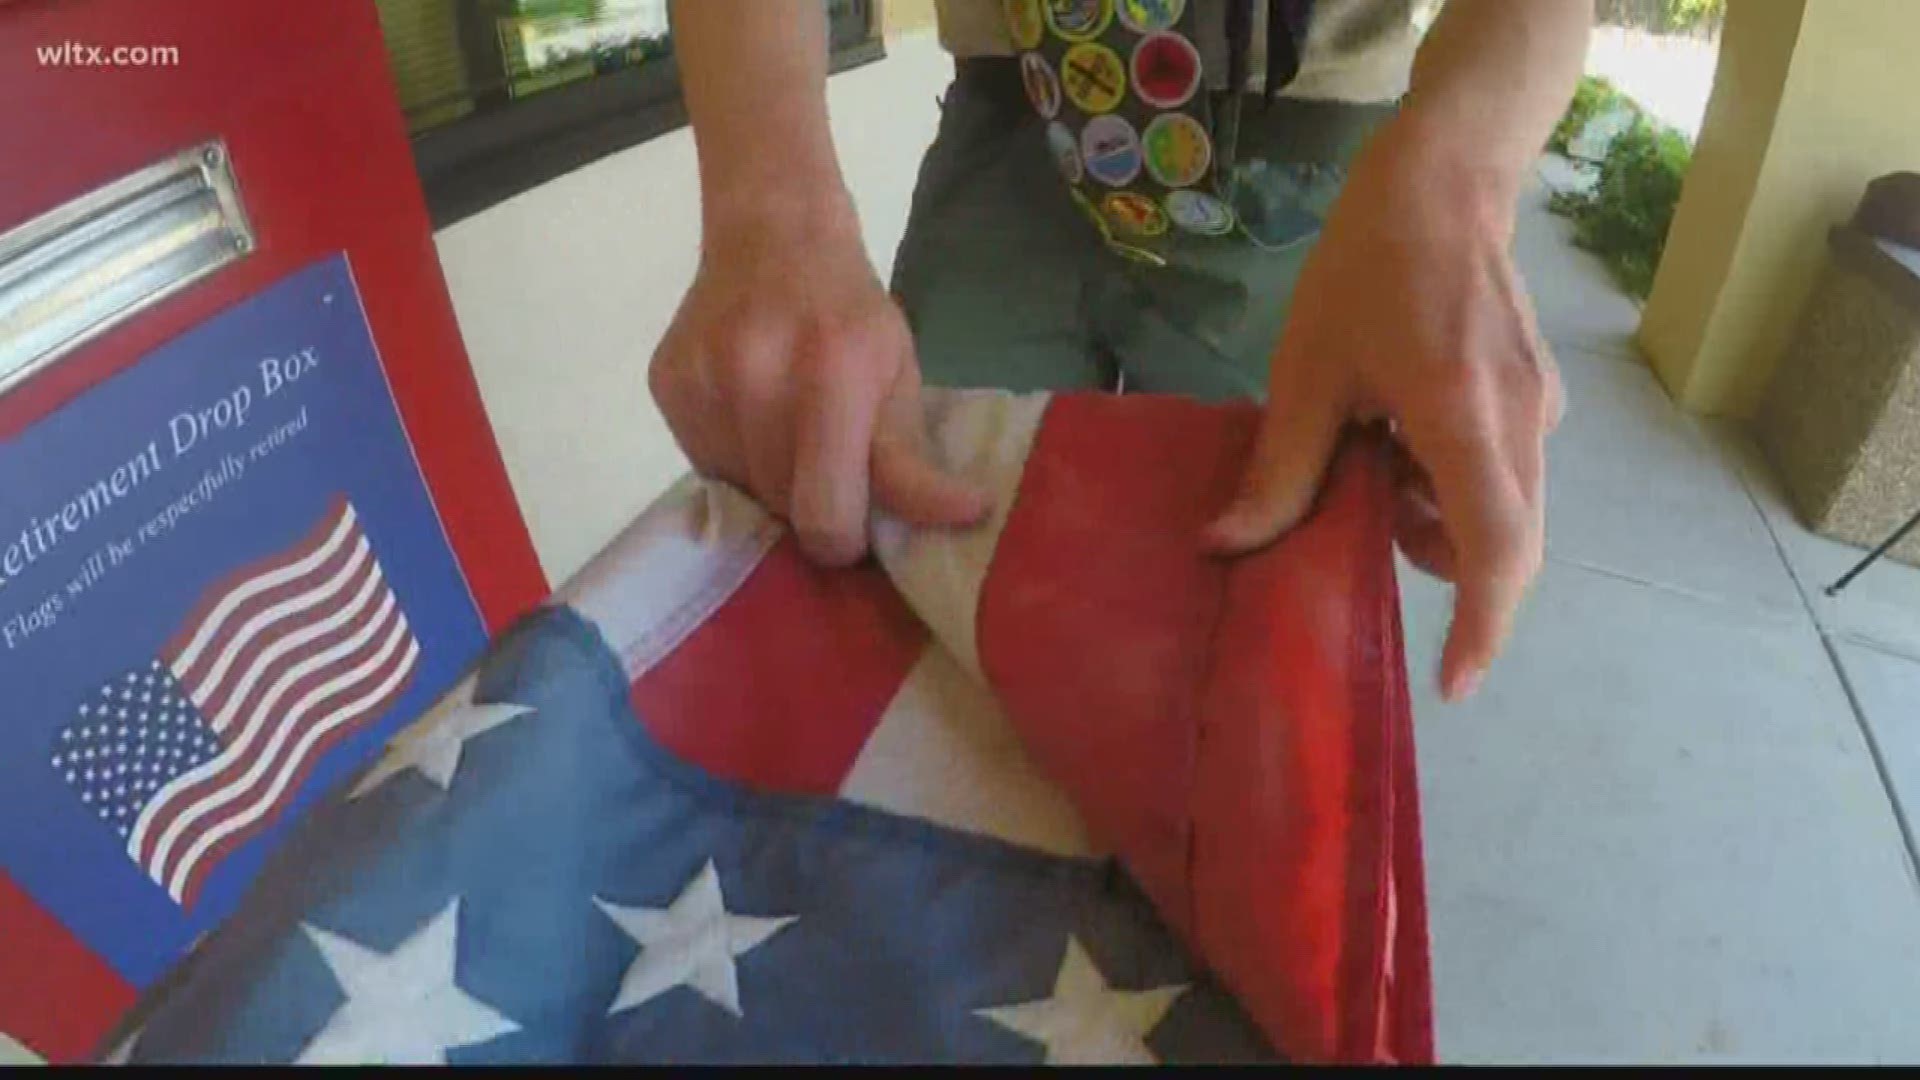 Eagle scouts show us how to take care of Old Glory